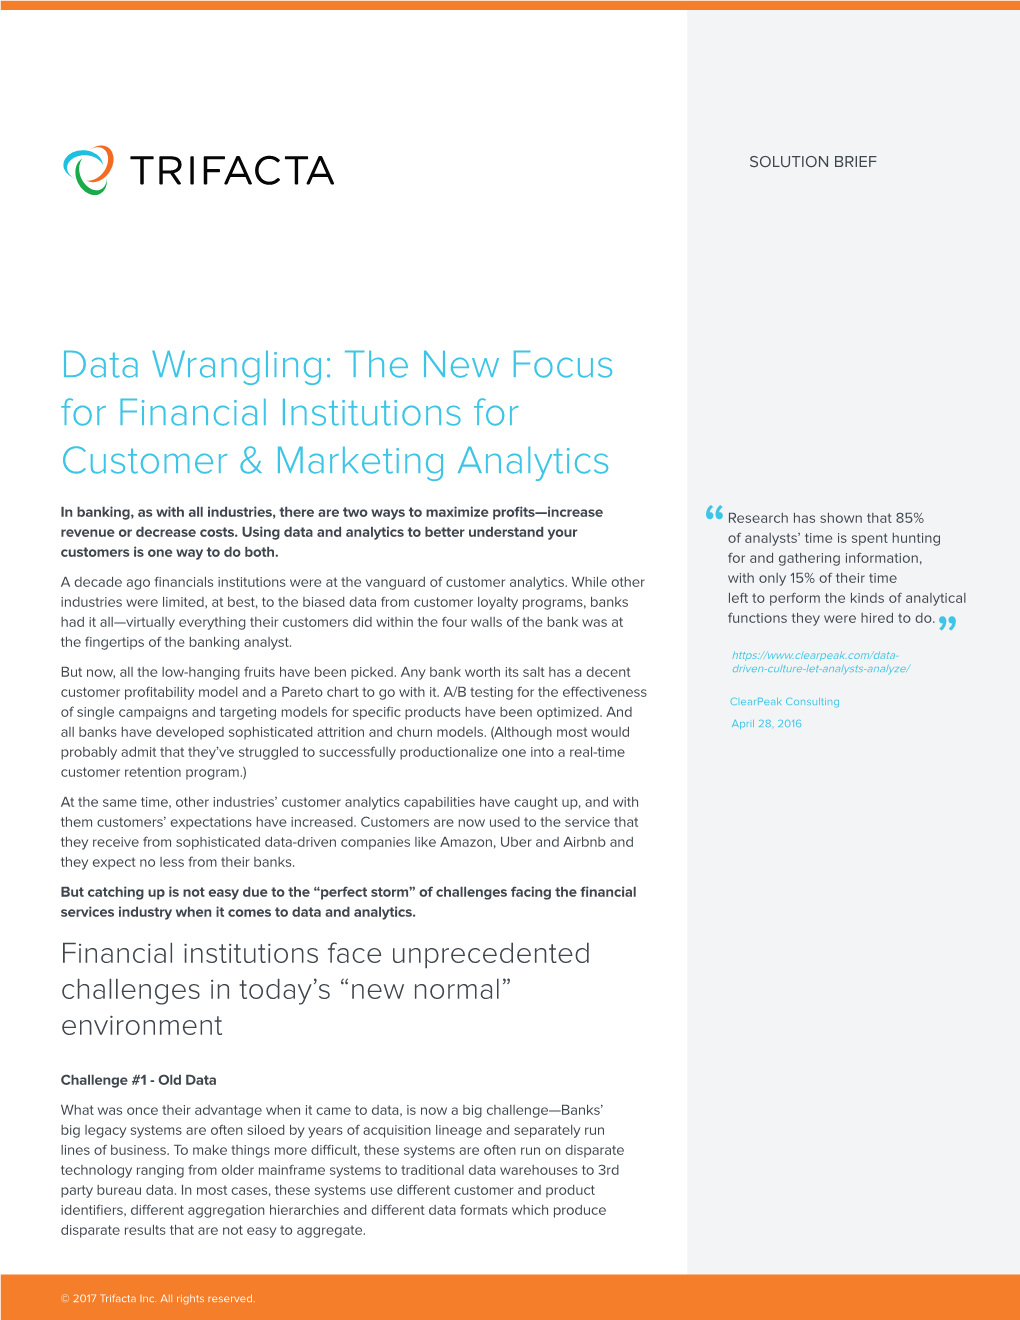 Data Wrangling: the New Focus for Financial Institutions for Customer & Marketing Analytics